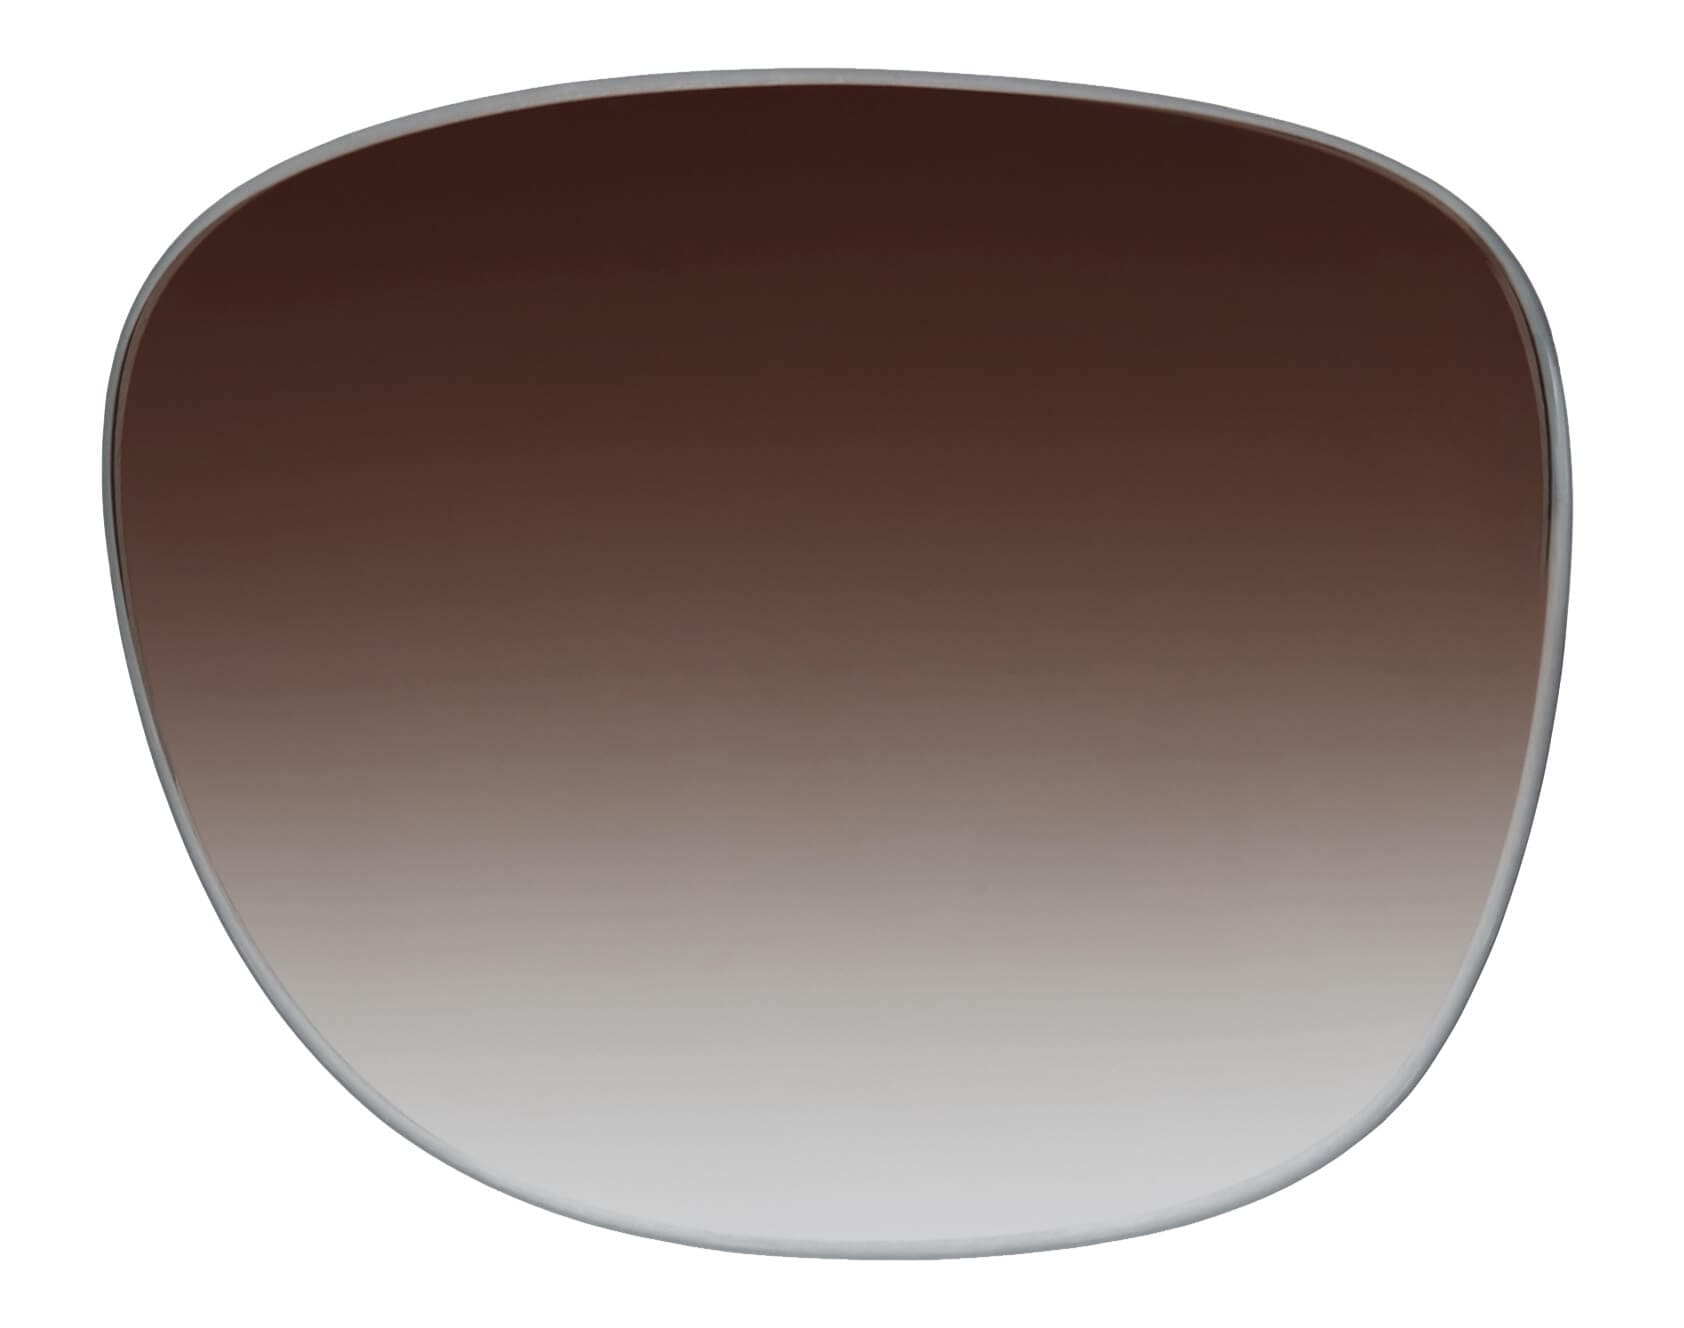 Custom clip-ons. Our polarized custom clip-ons reduce glare and are available for almost any frame. Each clip-on is specially cut to fit the frame with prices starting at just $6.95  (Compare to $50). Zenni square glasses #2020123 in clear, shown with gray polarized custom clip-on.